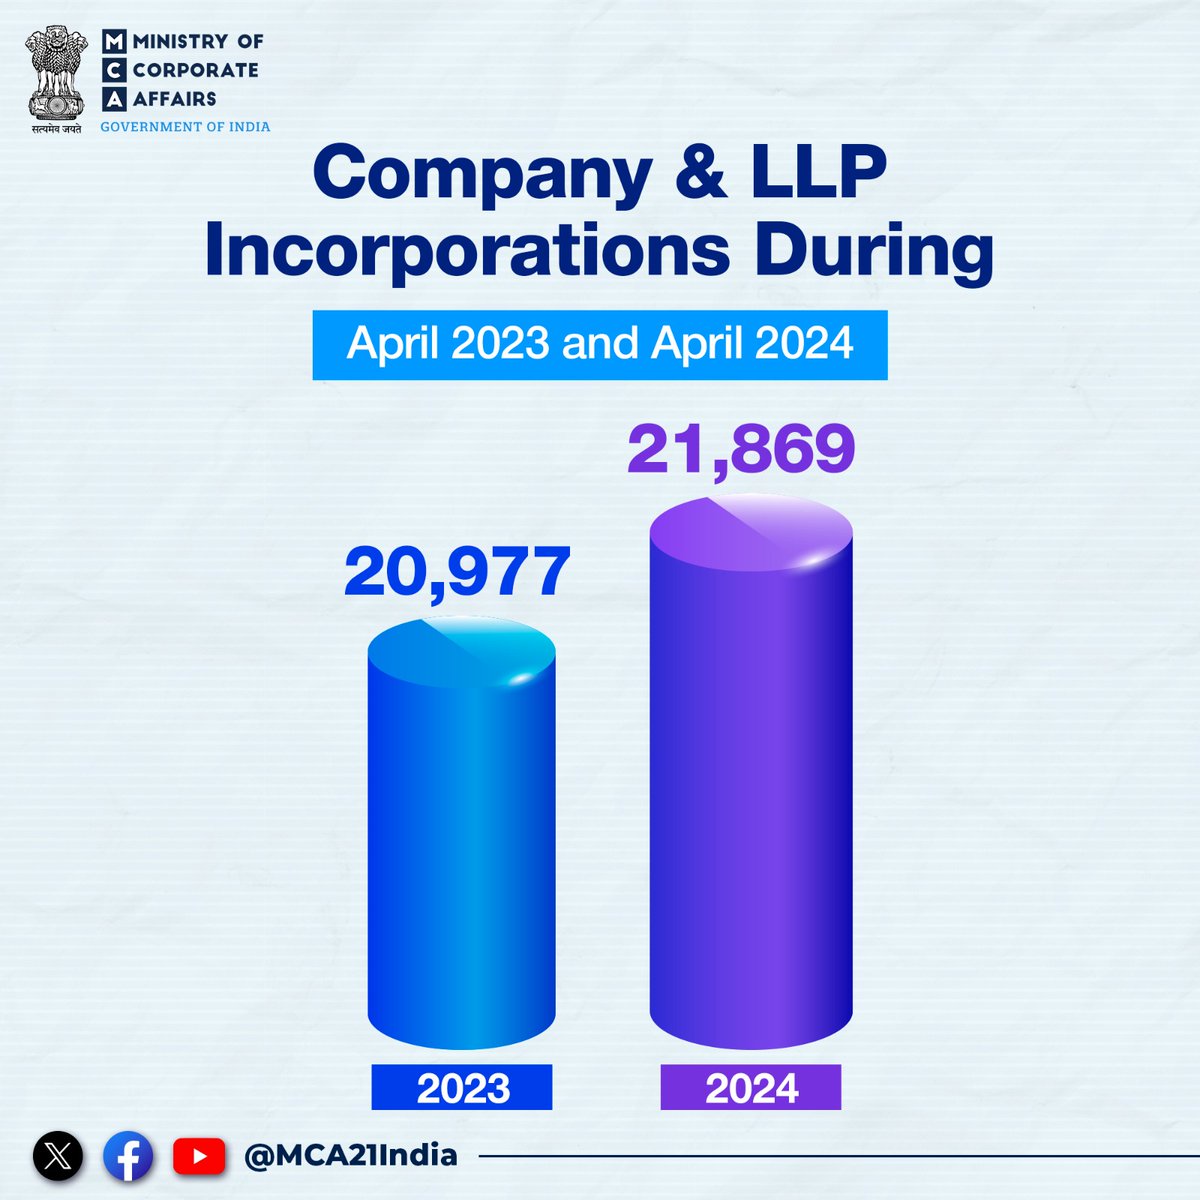 During April 2024, 21,869 companies and LLPs were incorporated, compared to the 20,977 companies and LLPs incorporated during April 2023.

#MCA #MCA21 #EaseOfDoingBusiness #Company #LLP #Incorporations